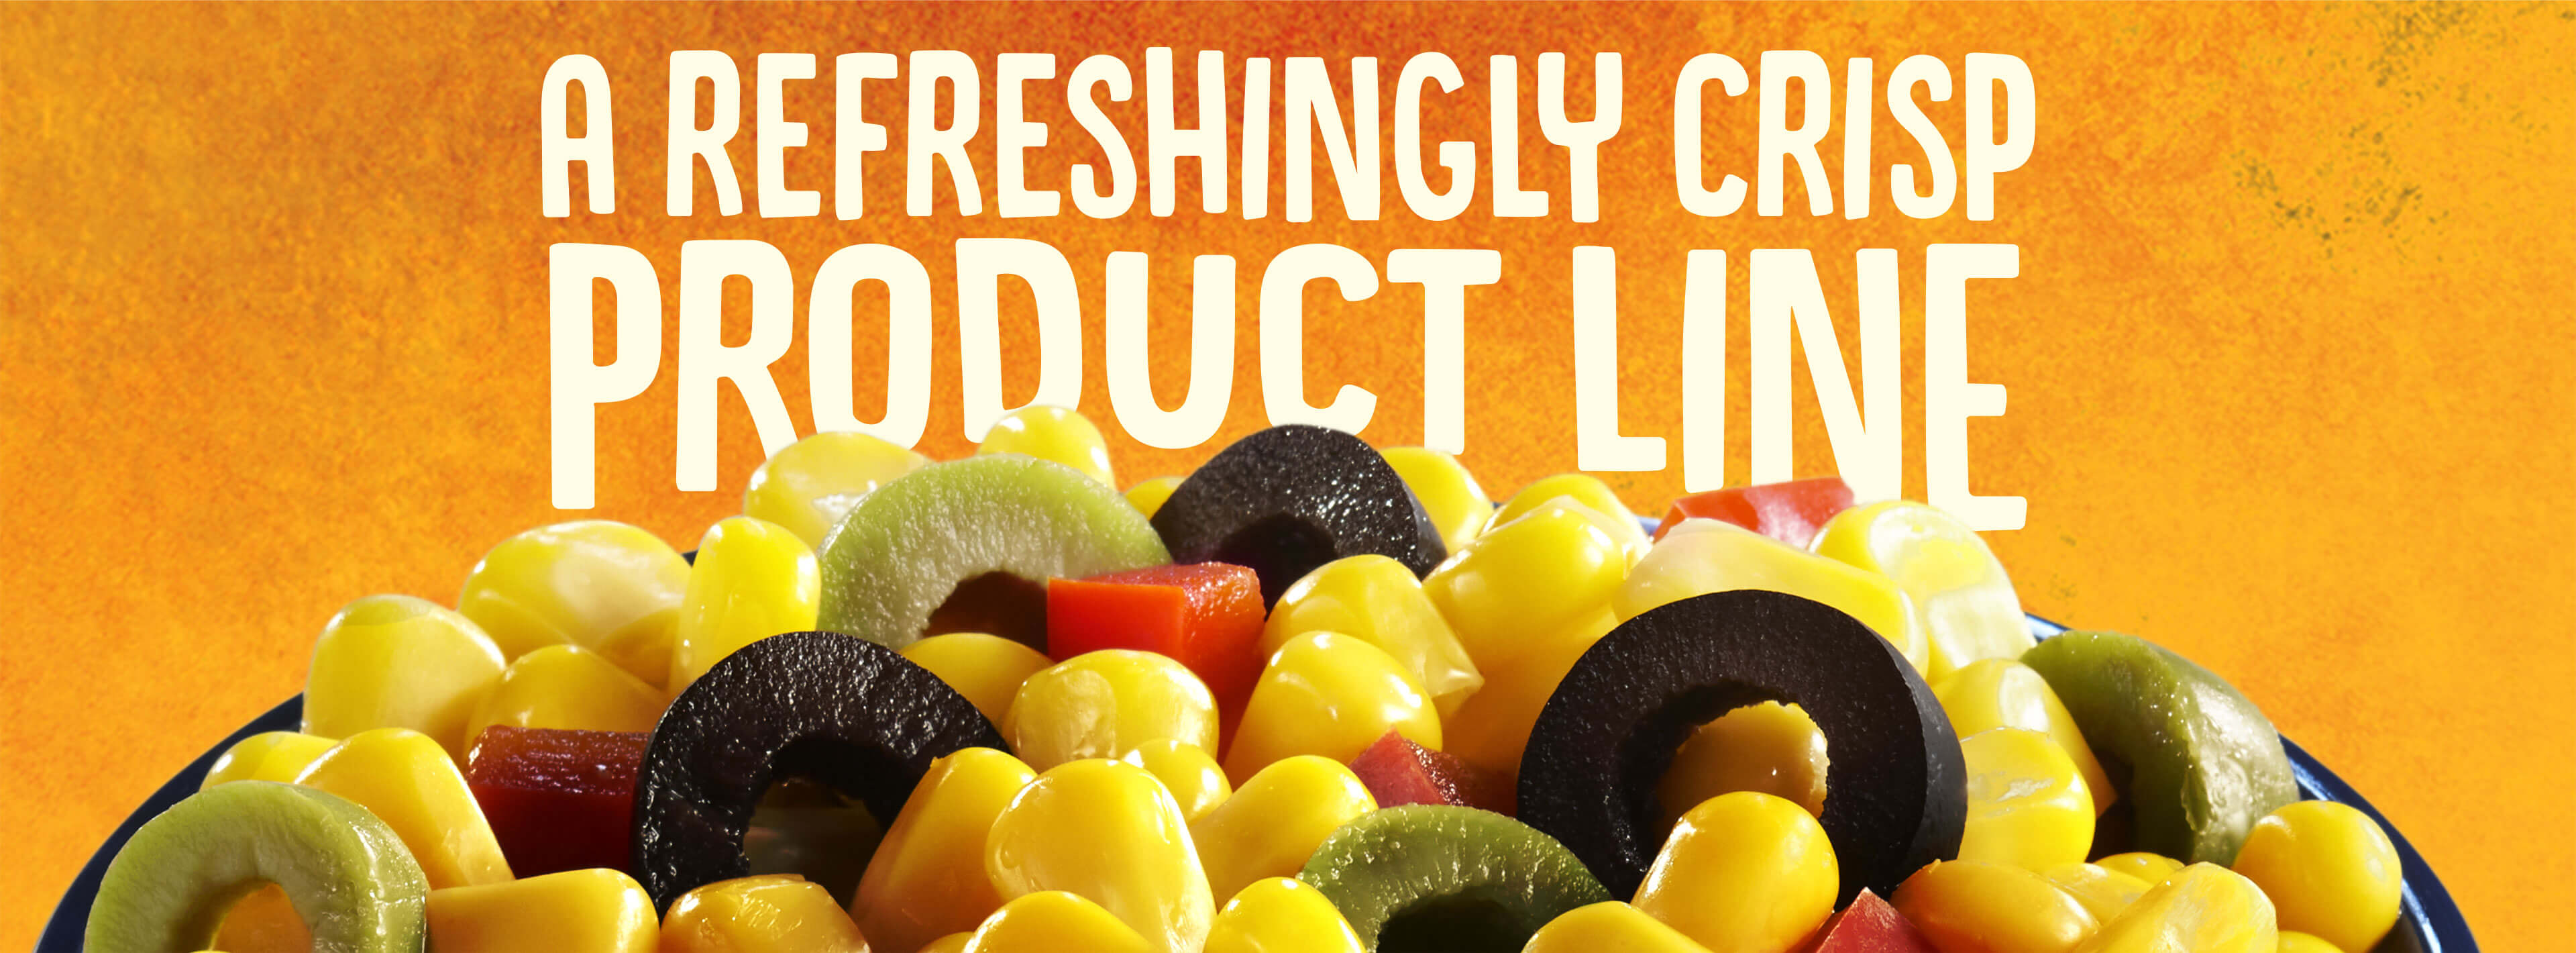 Refreshingly crispier products